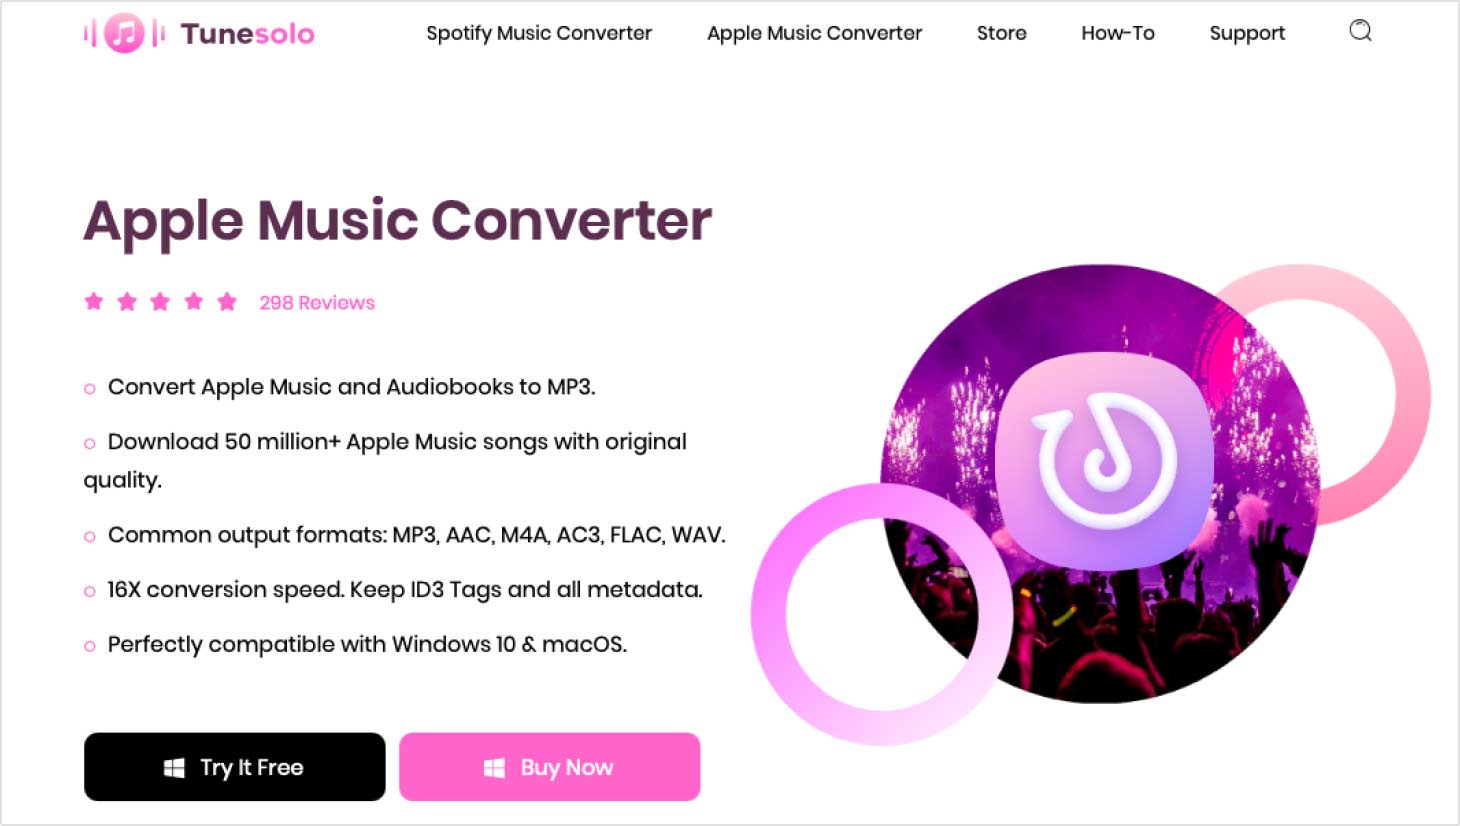 Features of TuneSolo Apple Music Converter